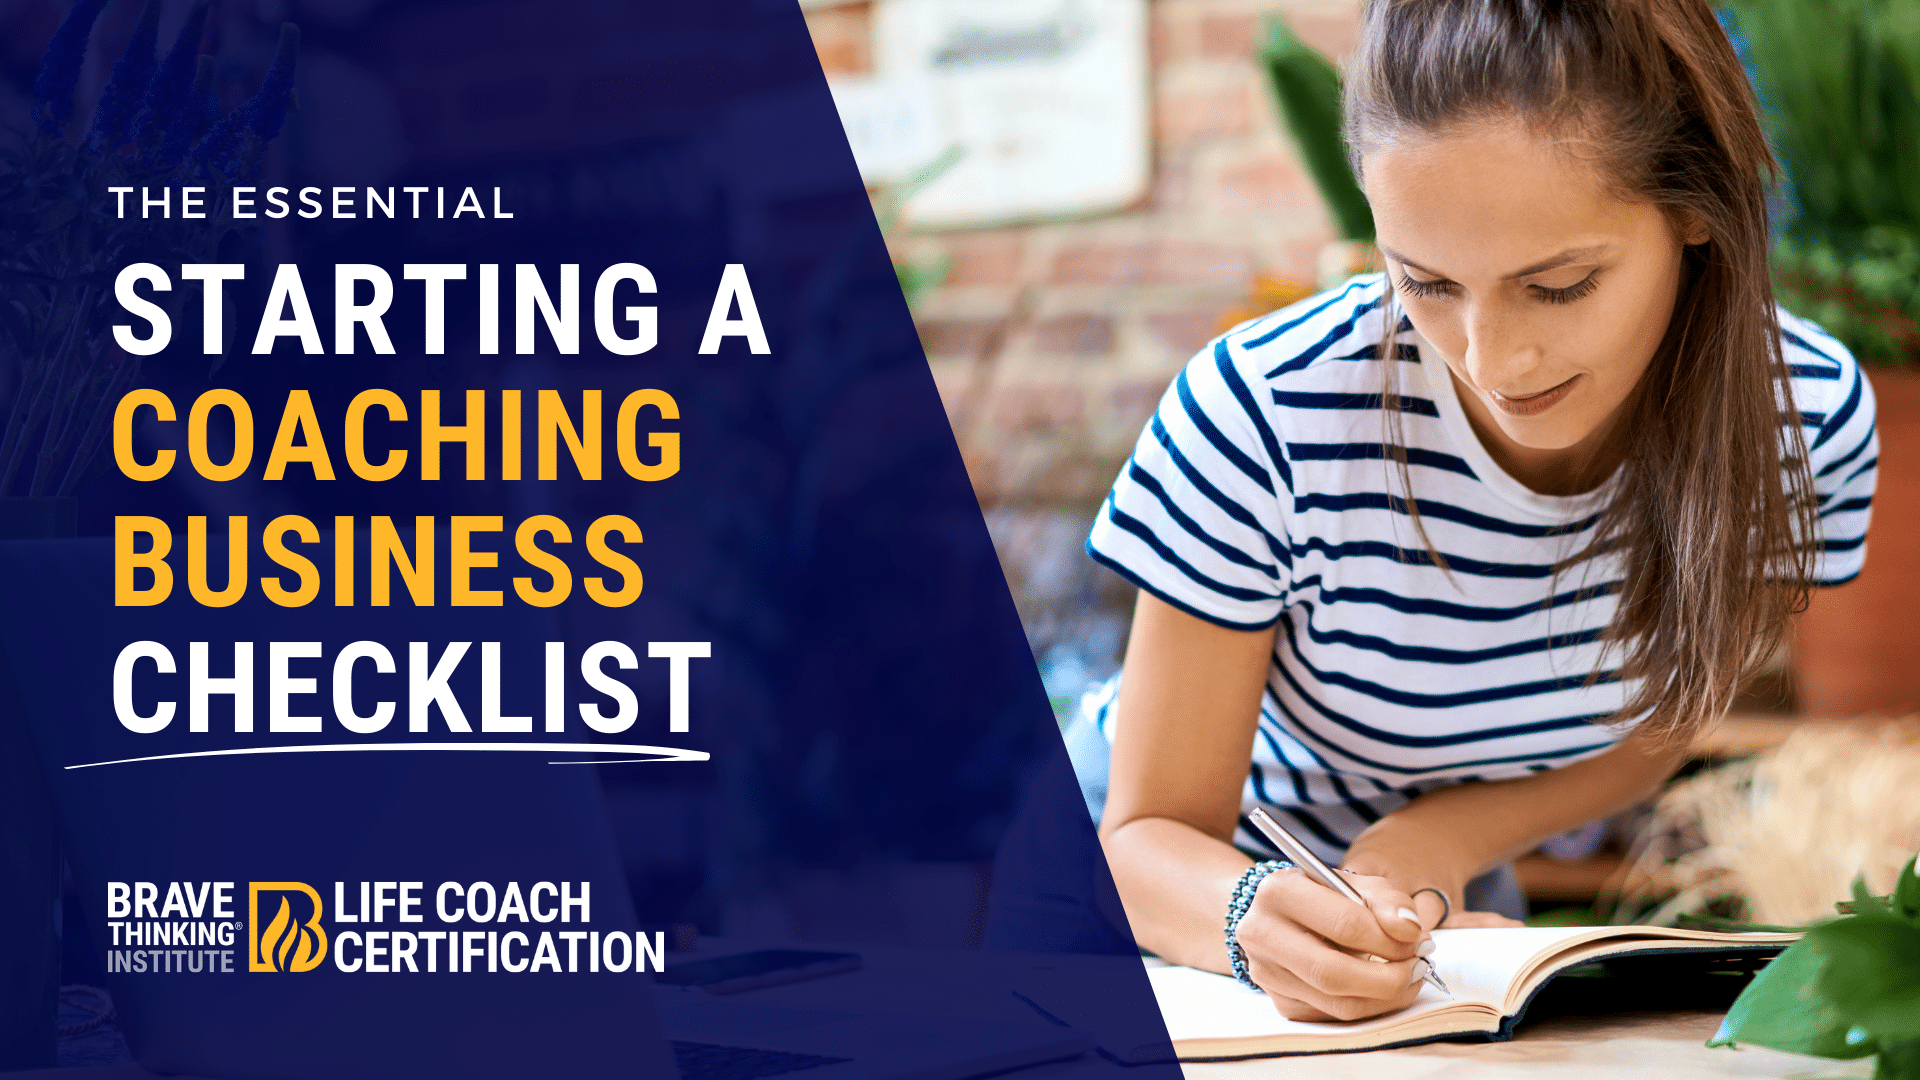 Starting a coaching business checklist PDF